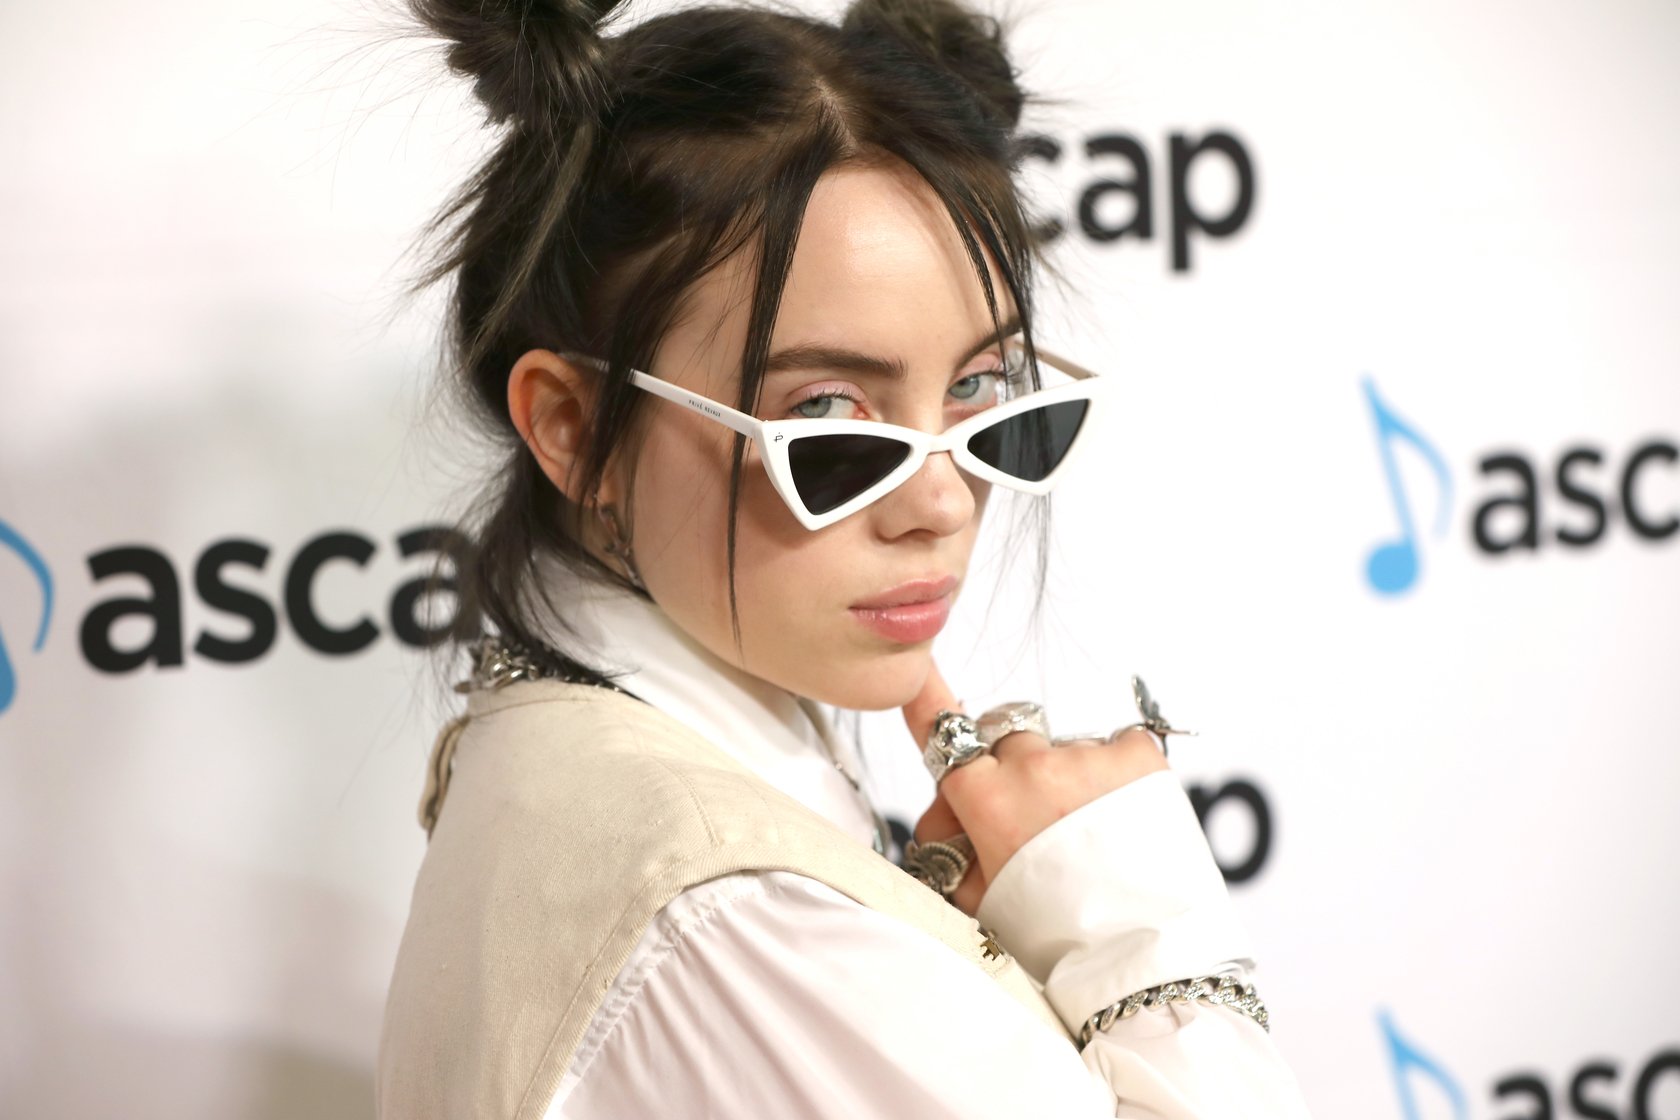  Billie Eilish attends the ASCAP 2019 Pop Music Awards at The Beverly Hilton Hotel on May 16, 2019 in Beverly Hills, California | Photo: GettyImages